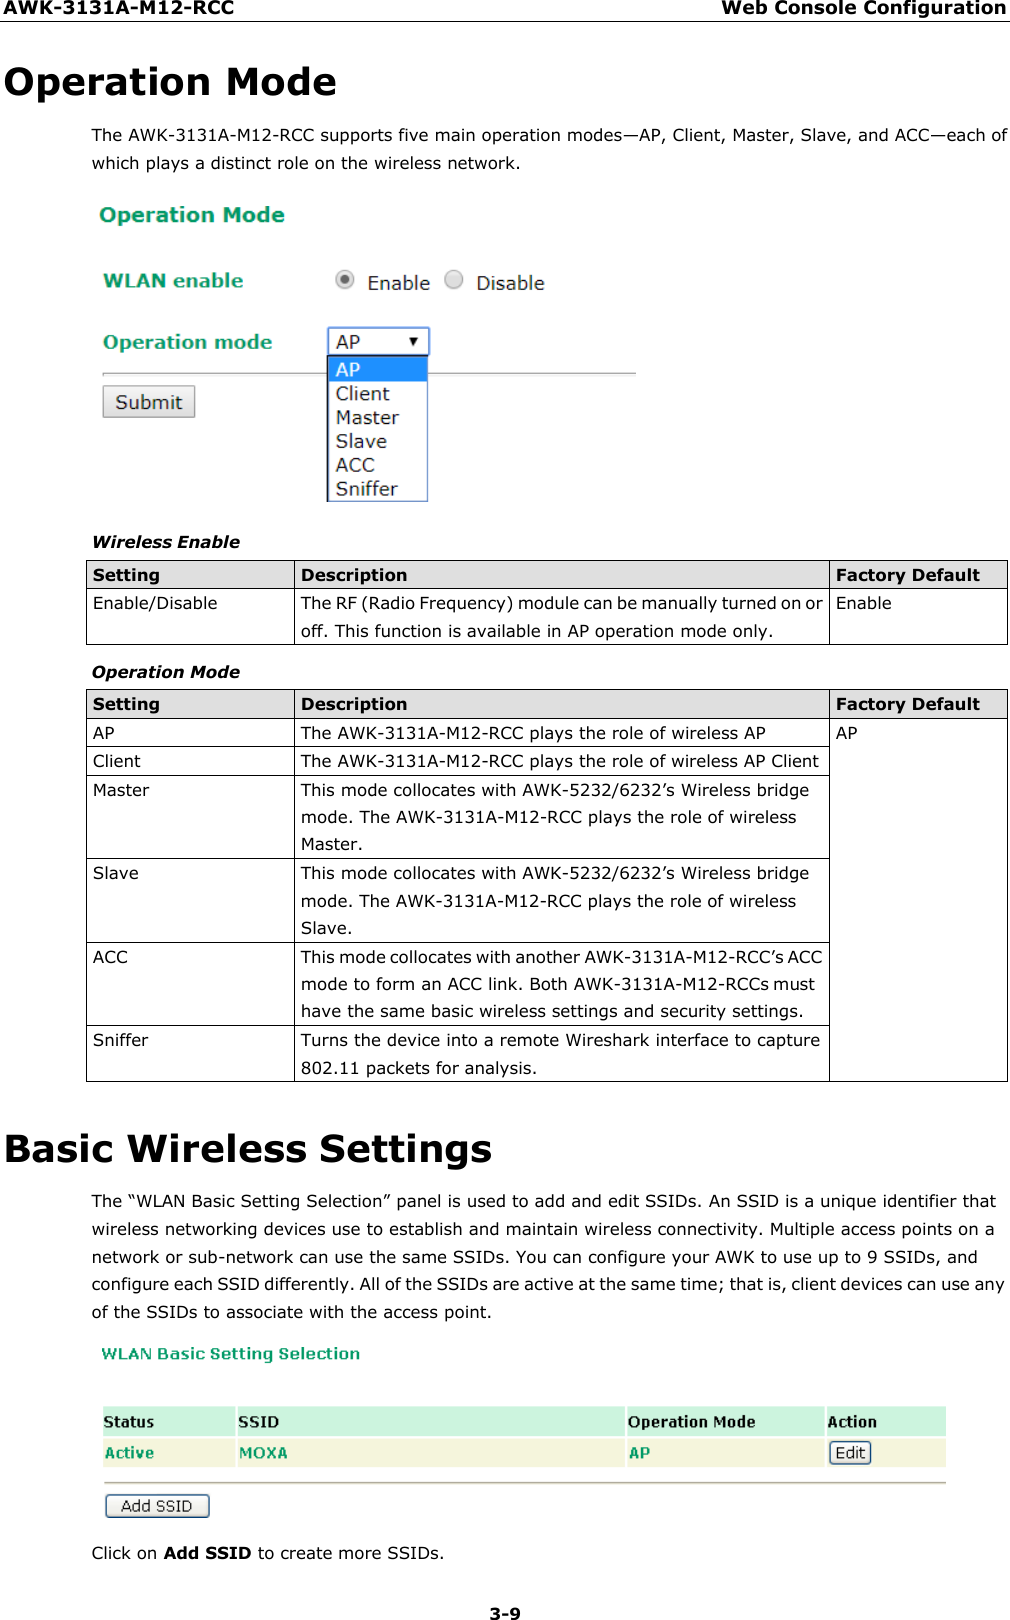 AWK-3131A-M12-RCC Web Console Configuration 3-9    Operation Mode The AWK-3131A-M12-RCC supports five main operation modes—AP, Client, Master, Slave, and ACC—each of which plays a distinct role on the wireless network.   Wireless Enable  Setting Description Factory Default Enable/Disable The RF (Radio Frequency) module can be manually turned on or off. This function is available in AP operation mode only. Enable Operation Mode  Setting Description Factory Default AP The AWK-3131A-M12-RCC plays the role of wireless AP AP Client The AWK-3131A-M12-RCC plays the role of wireless AP Client Master This mode collocates with AWK-5232/6232’s Wireless bridge mode. The AWK-3131A-M12-RCC plays the role of wireless Master. Slave This mode collocates with AWK-5232/6232’s Wireless bridge mode. The AWK-3131A-M12-RCC plays the role of wireless Slave. ACC This mode collocates with another AWK-3131A-M12-RCC’s ACC mode to form an ACC link. Both AWK-3131A-M12-RCCs must have the same basic wireless settings and security settings. Sniffer Turns the device into a remote Wireshark interface to capture 802.11 packets for analysis.  Basic Wireless Settings The “WLAN Basic Setting Selection” panel is used to add and edit SSIDs. An SSID is a unique identifier that wireless networking devices use to establish and maintain wireless connectivity. Multiple access points on a network or sub-network can use the same SSIDs. You can configure your AWK to use up to 9 SSIDs, and configure each SSID differently. All of the SSIDs are active at the same time; that is, client devices can use any of the SSIDs to associate with the access point.   Click on Add SSID to create more SSIDs. 